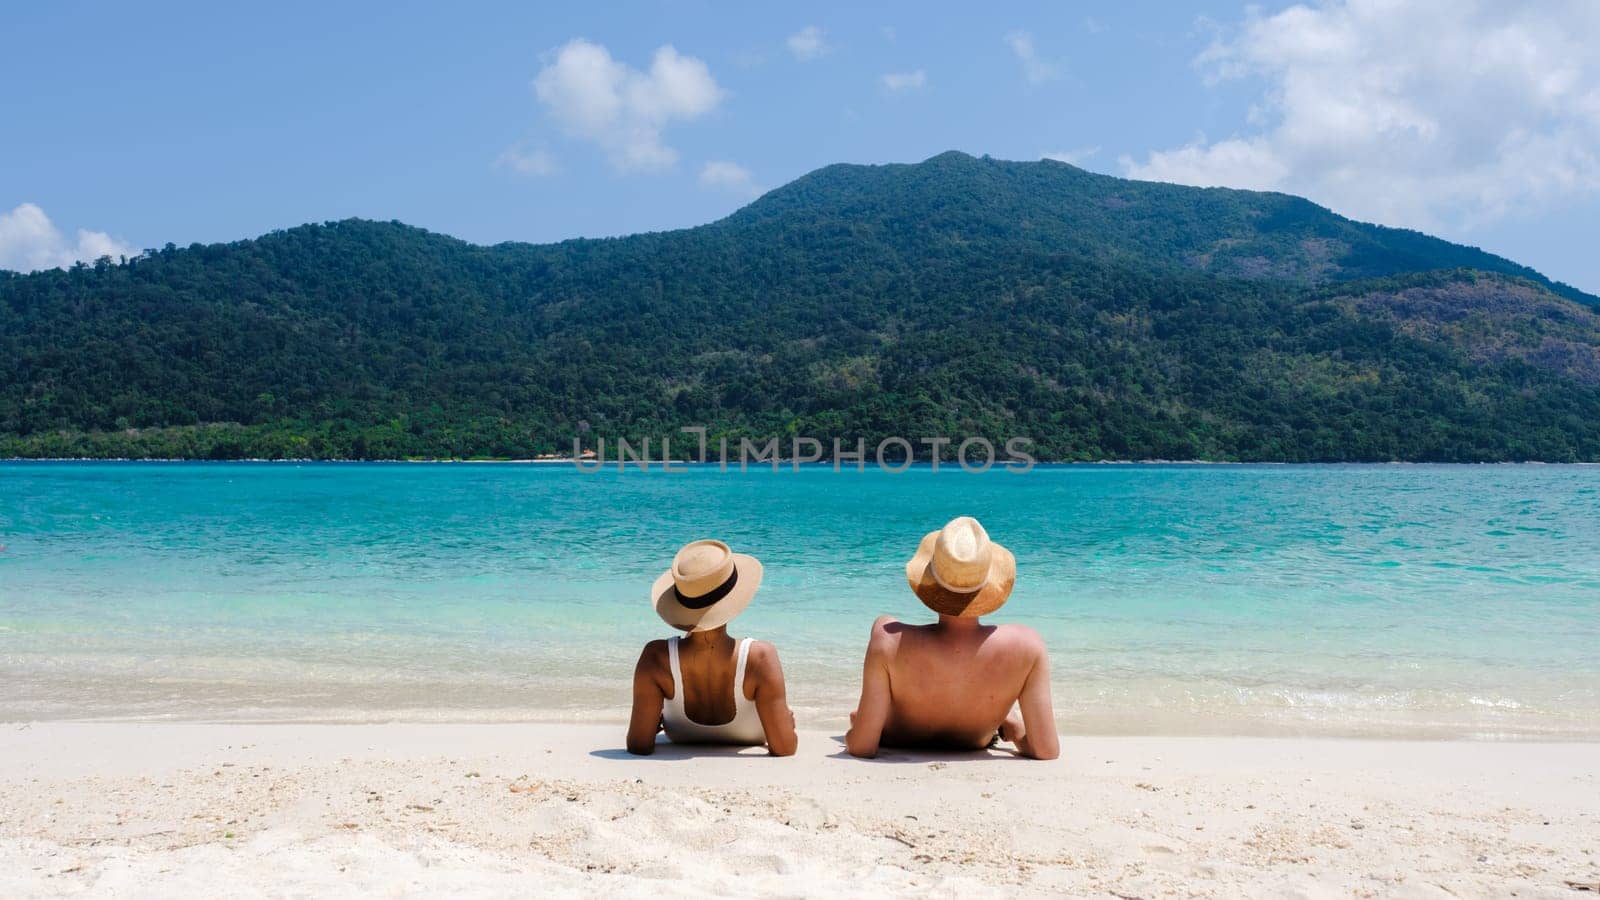 Couple on the beach of Koh Lipe Island Thailand, a tropical Island with a blue ocean and white soft sand. Ko Lipe Island Thailand